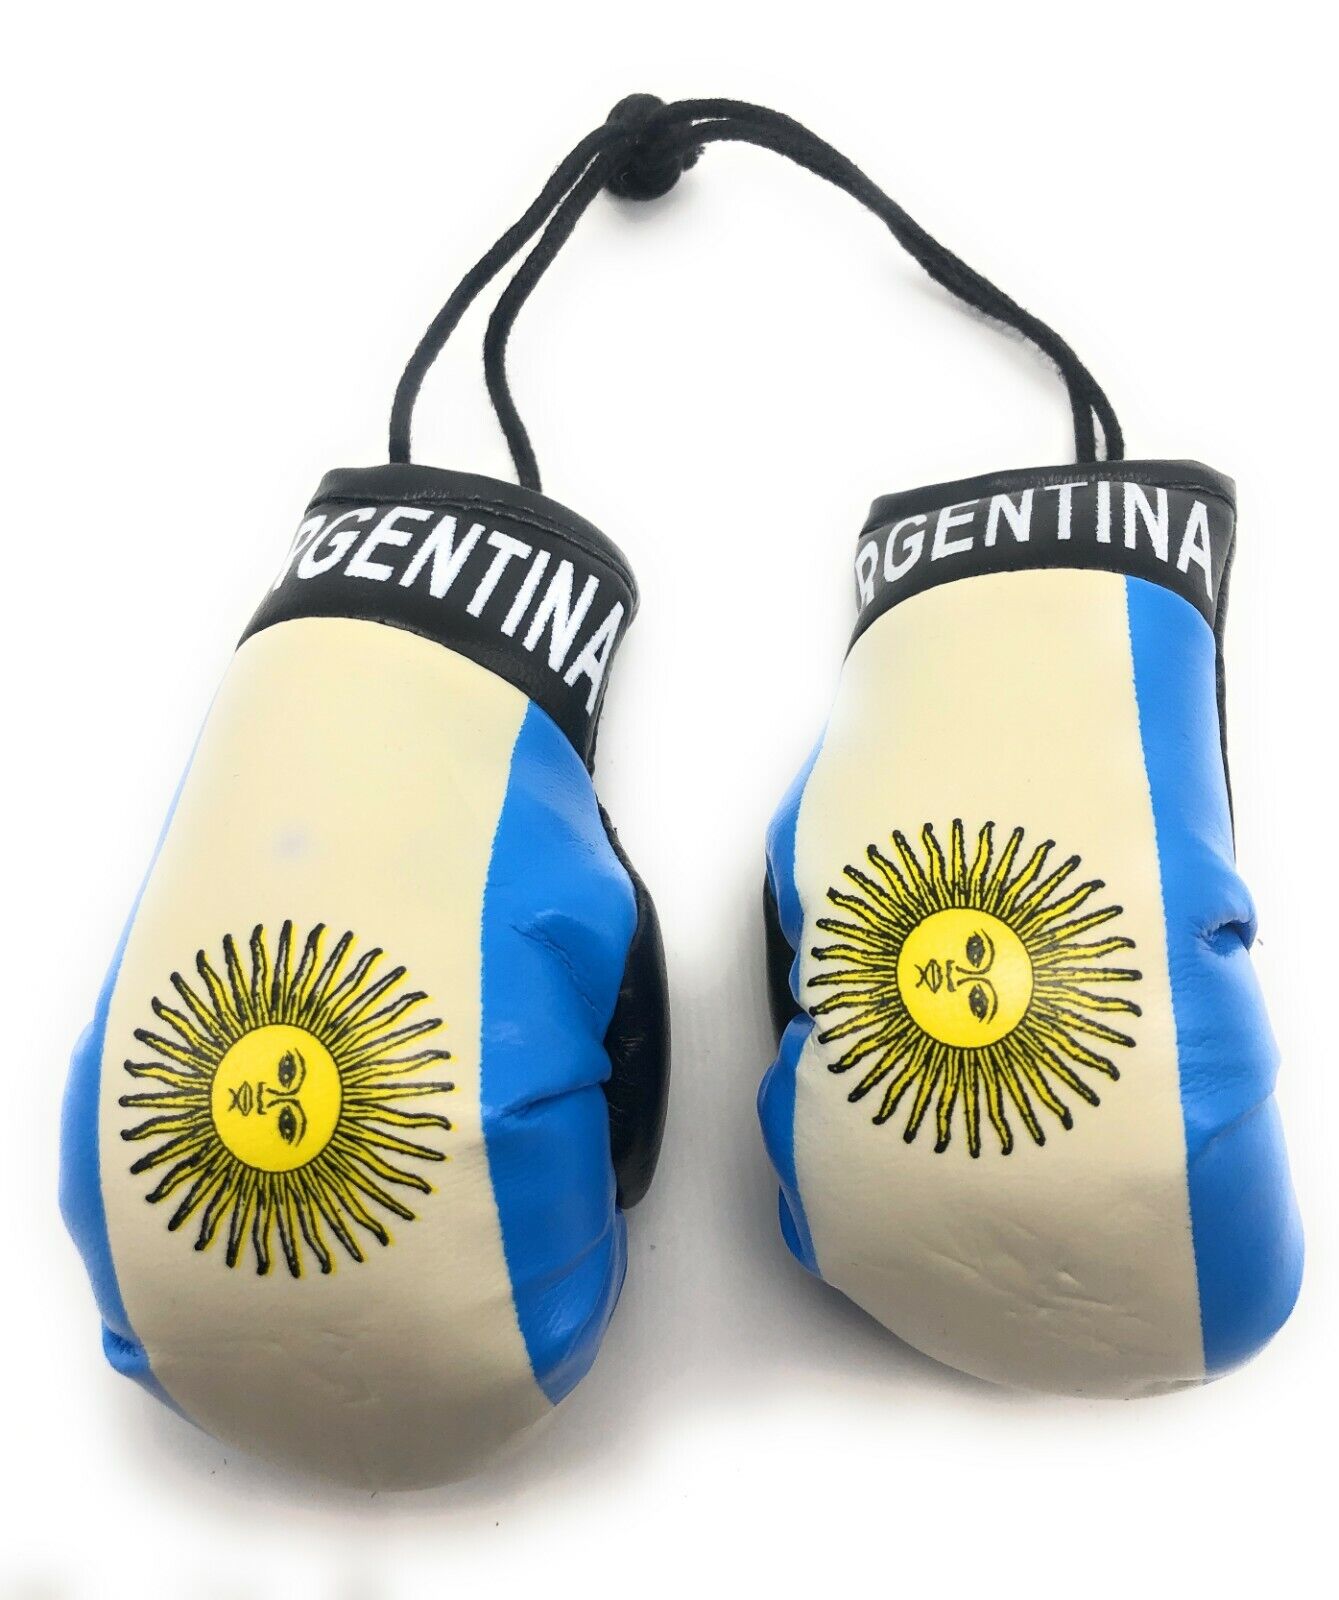 Country Flag Mini Boxing Gloves - New, One Pair, Multiple Countries Available